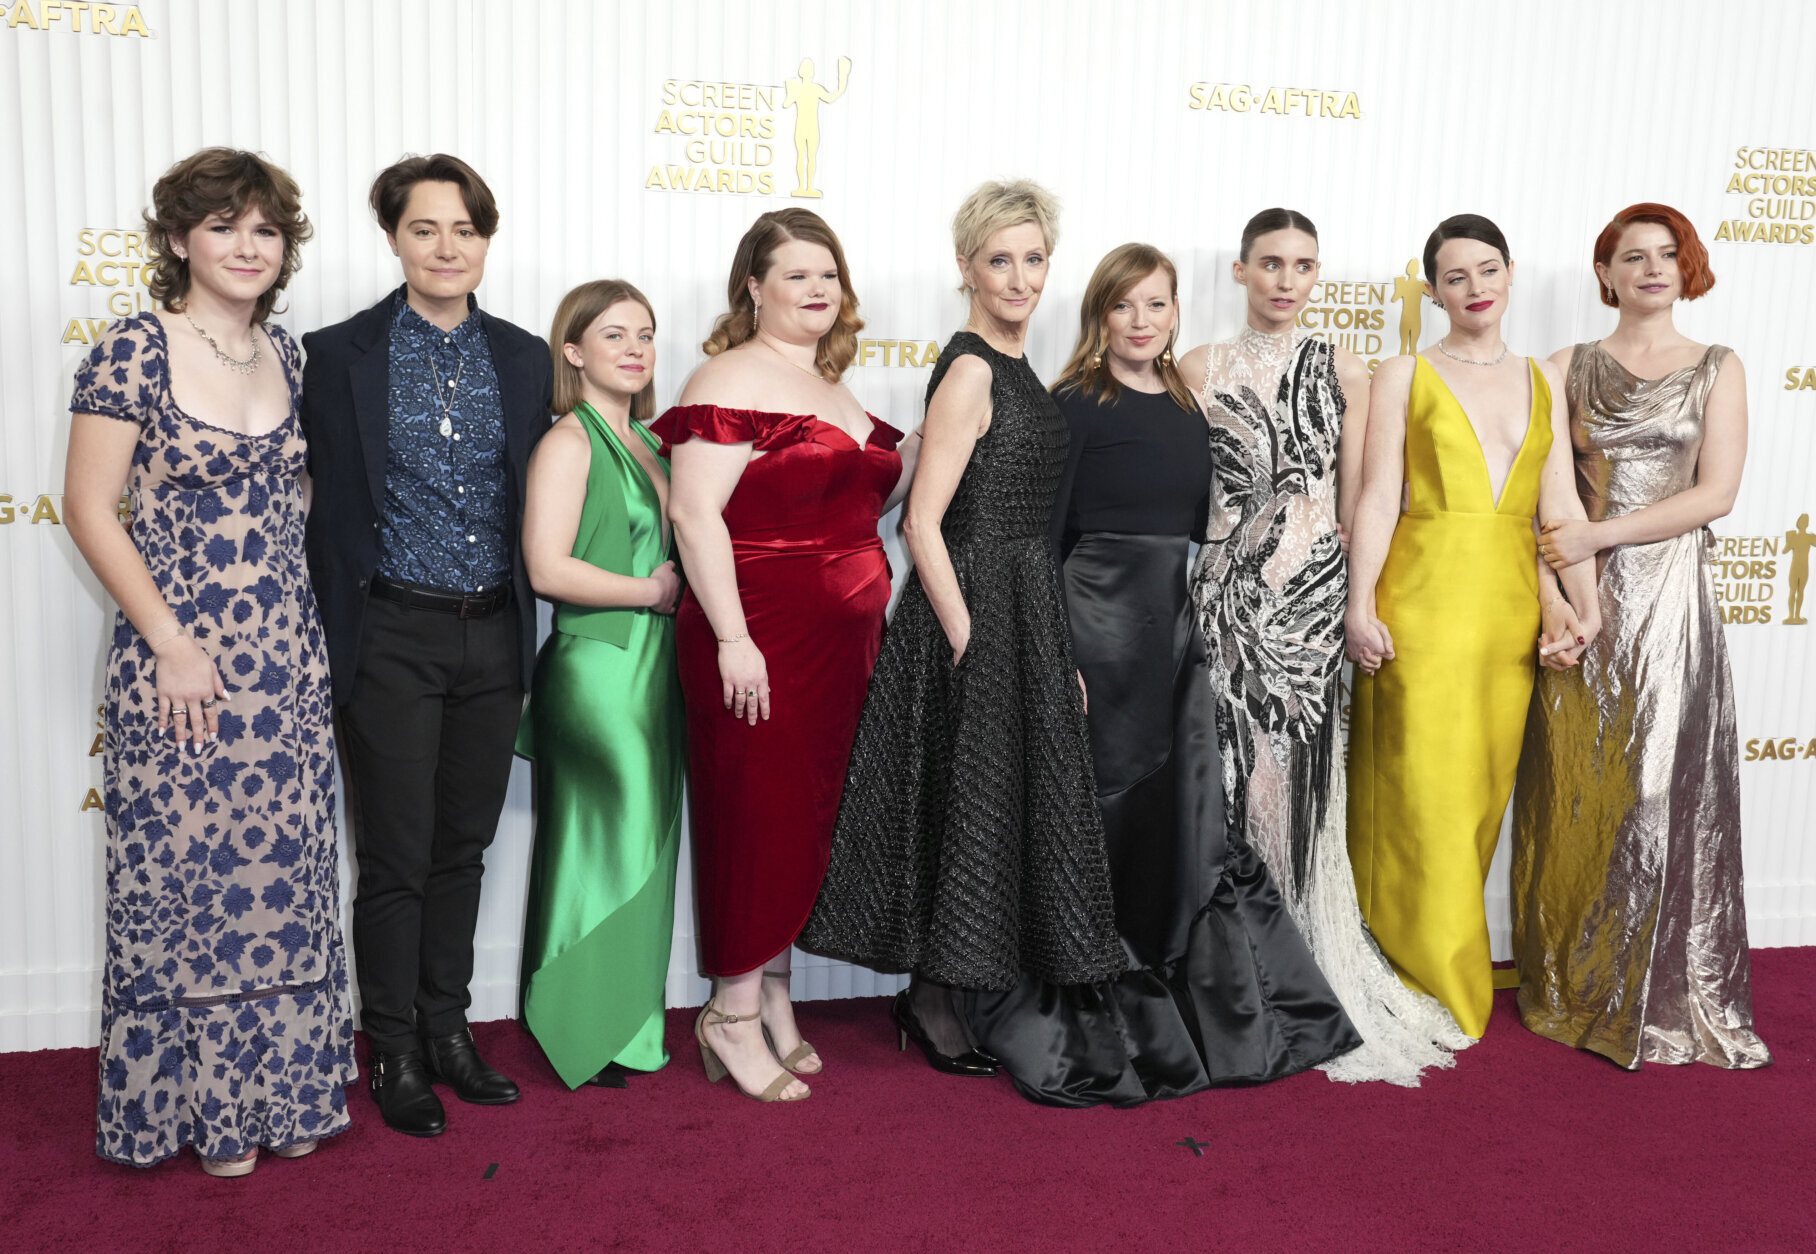 Liv McNeil, from left, August Winter, Kate Hallett, Michelle McLeod, Sheila McCarthy, Sarah Polley, Rooney Mara, Claire Foy, and Jessie Buckley arrive at the 29th annual Screen Actors Guild Awards on Sunday, Feb. 26, 2023, at the Fairmont Century Plaza in Los Angeles. (Photo by Jordan Strauss/Invision/AP)